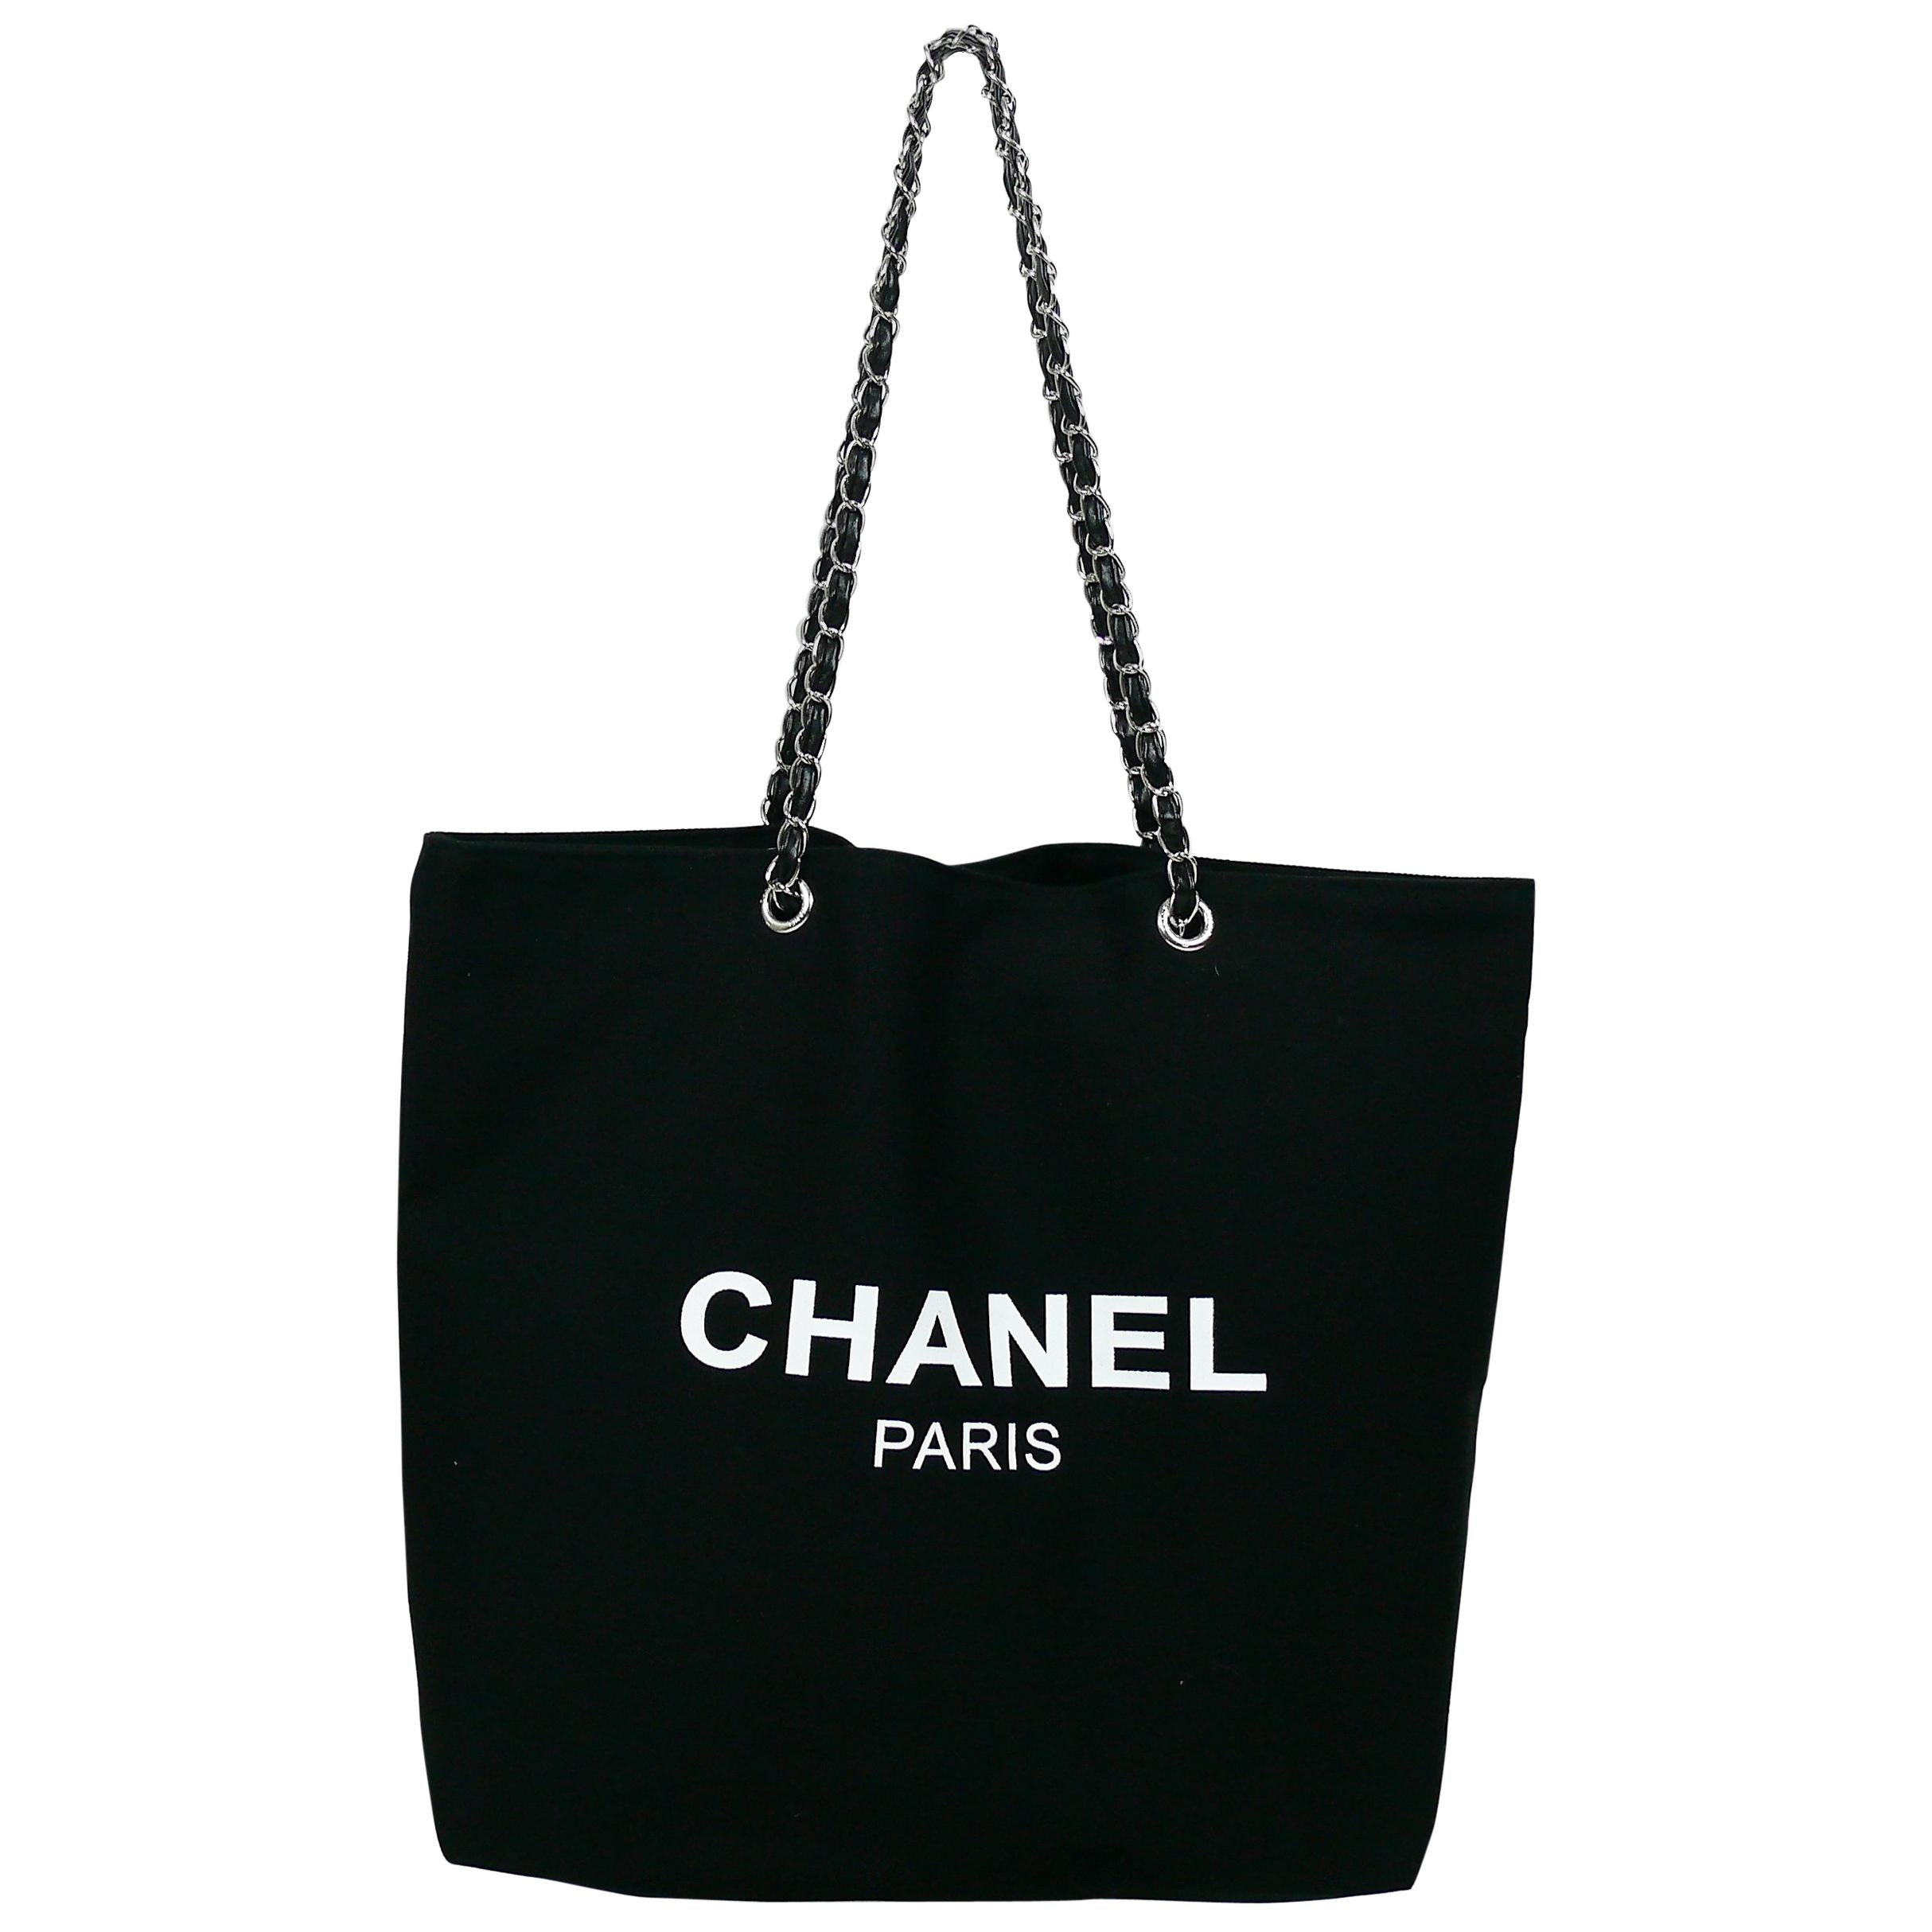 Chanel Black Canvas Tote Shopping Gift Bag